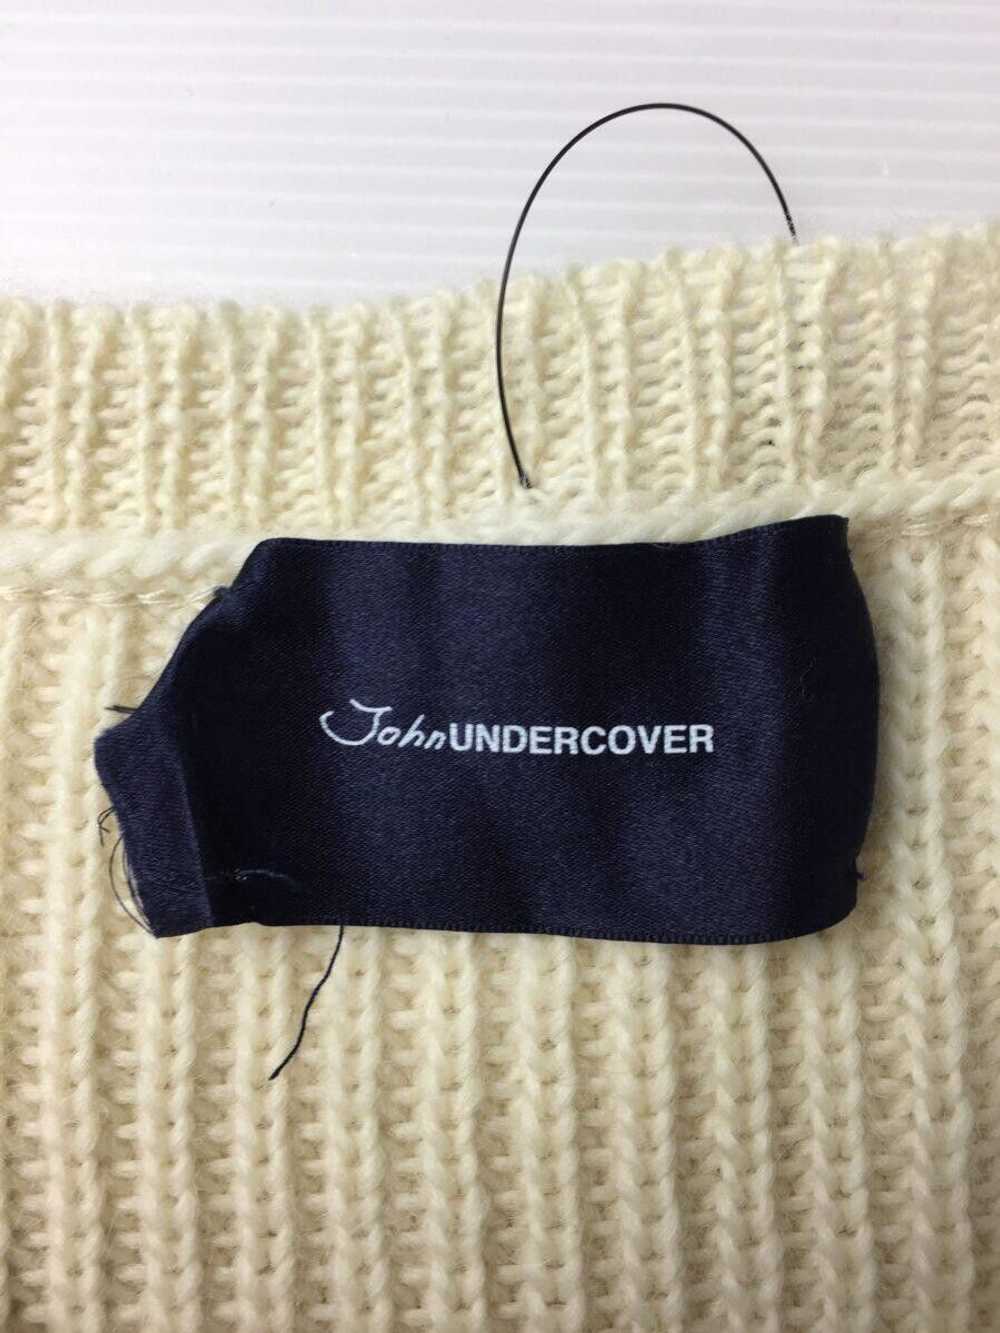 Undercover Hybrid Mohair Patchwork Knit Sweater - image 6